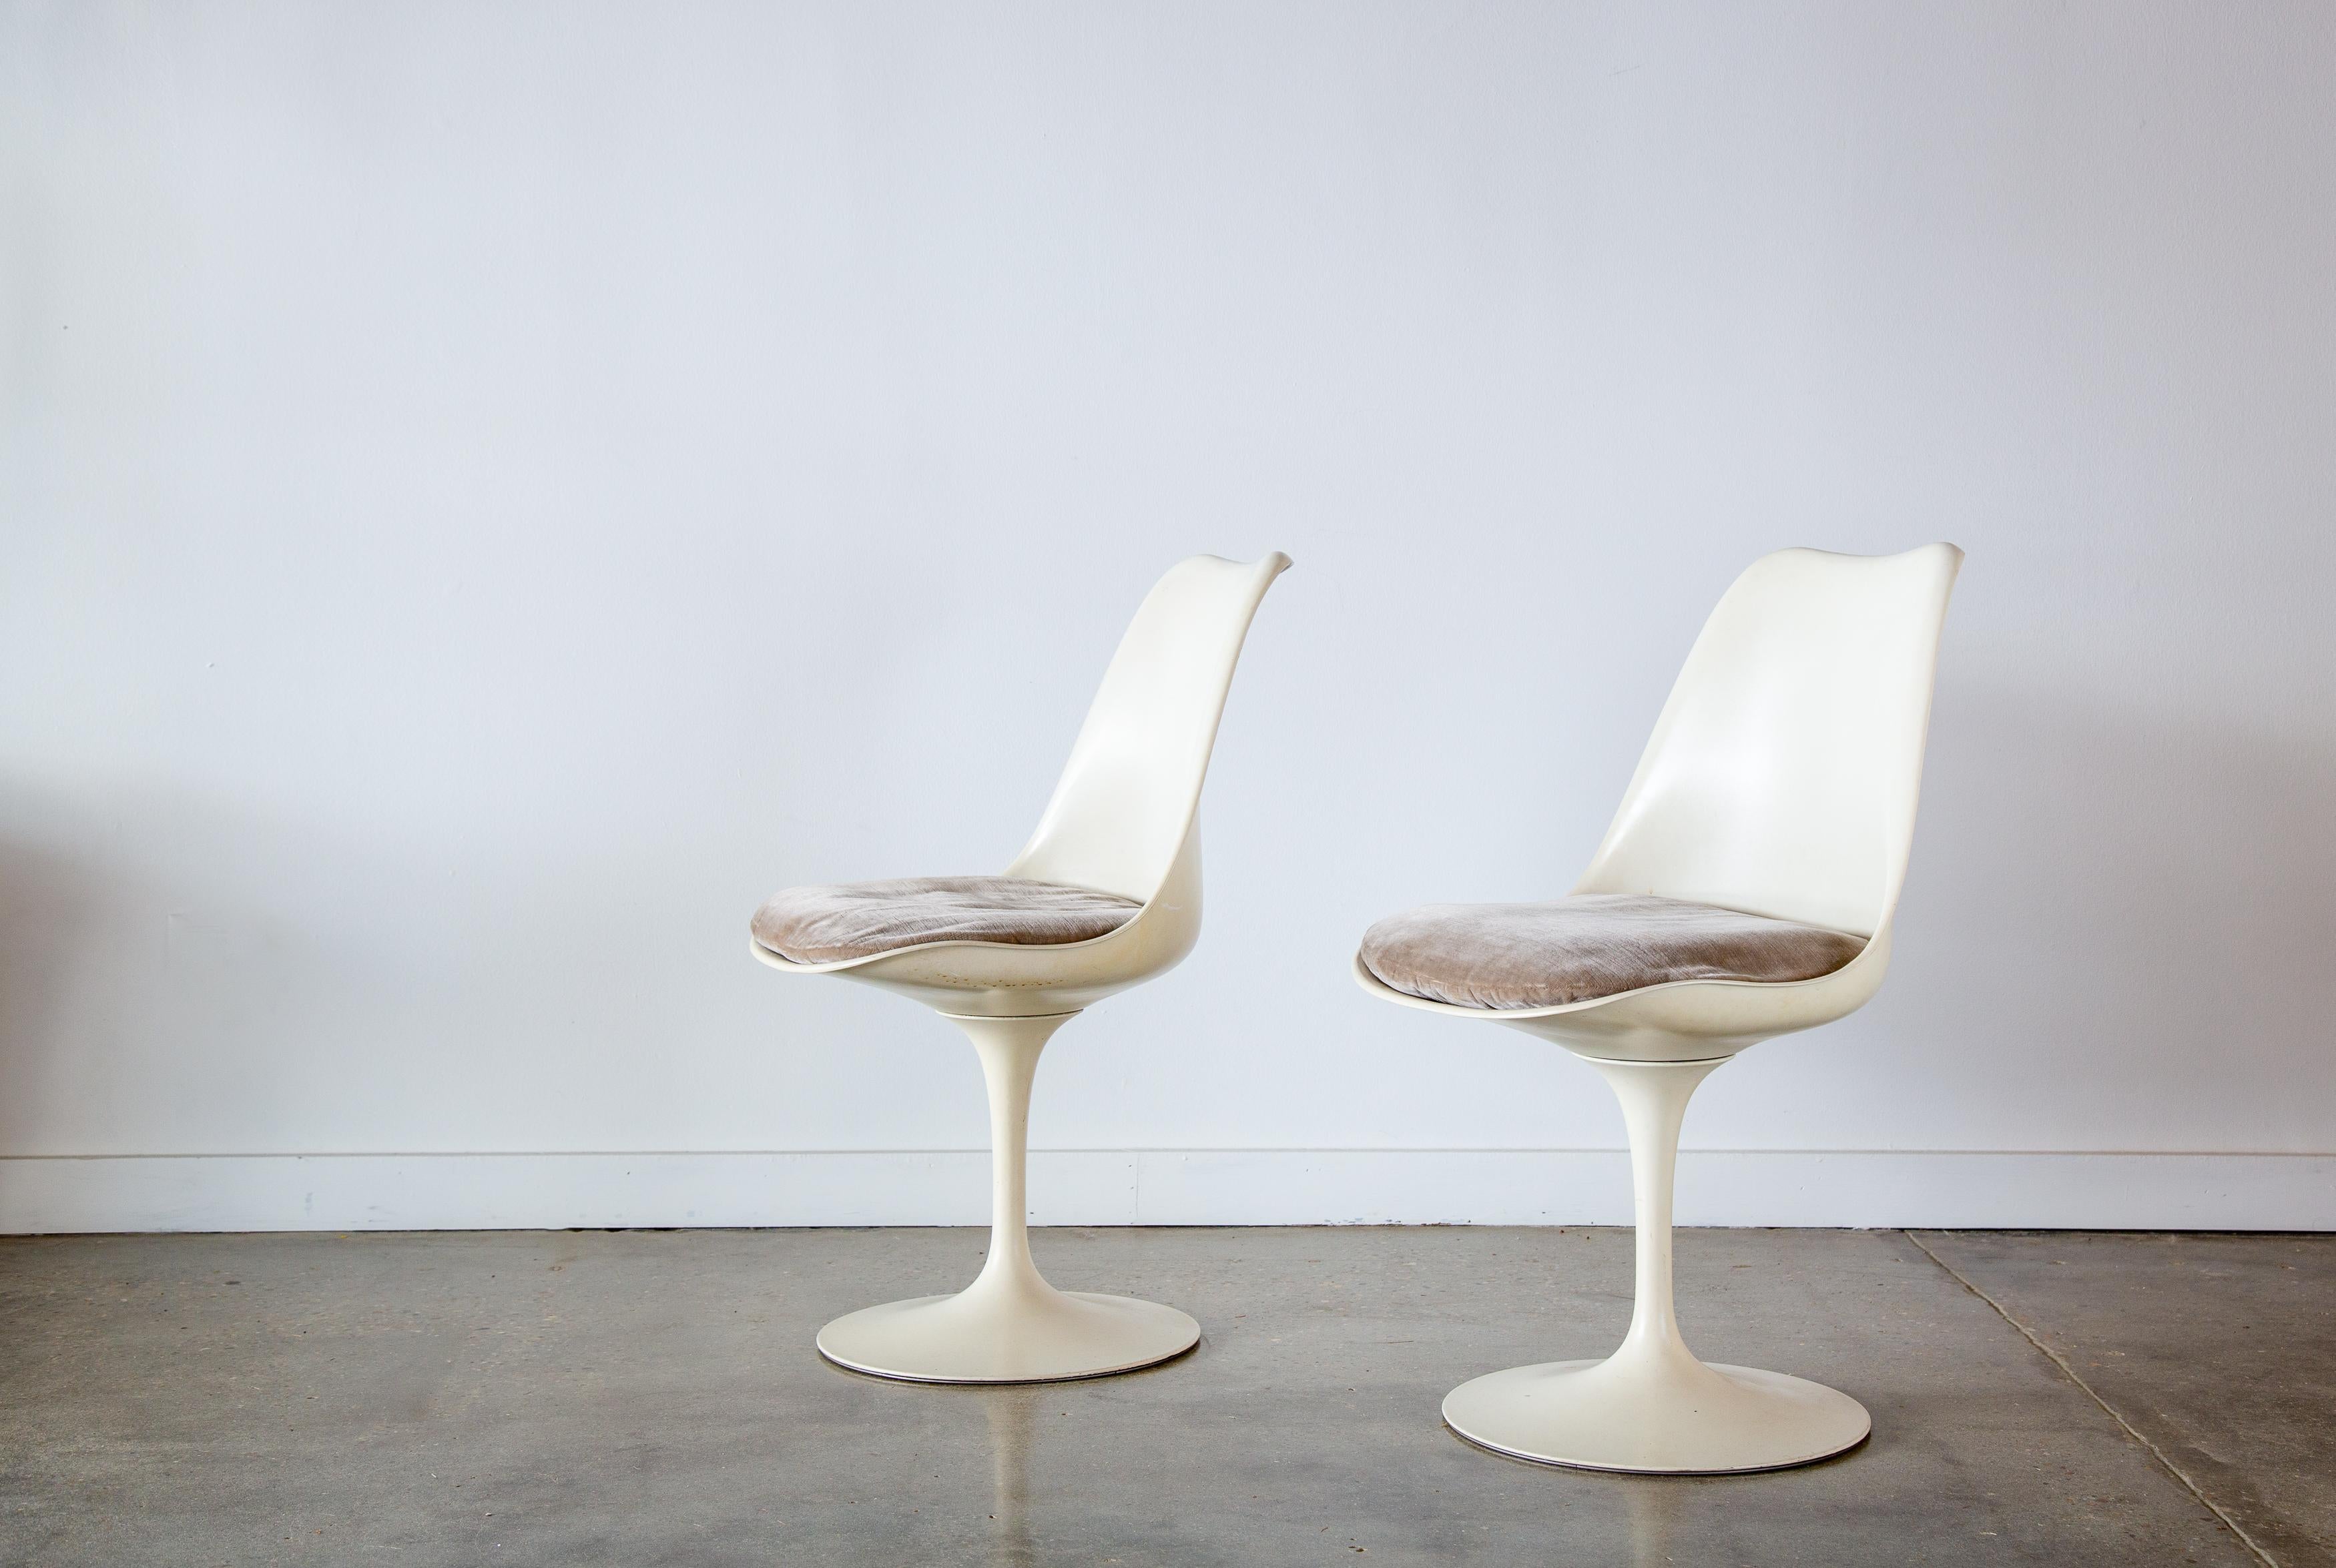 Mid-20th Century 1950s Early Tulip Swivel Chairs by Eero Saarinen for Knoll - a pair For Sale